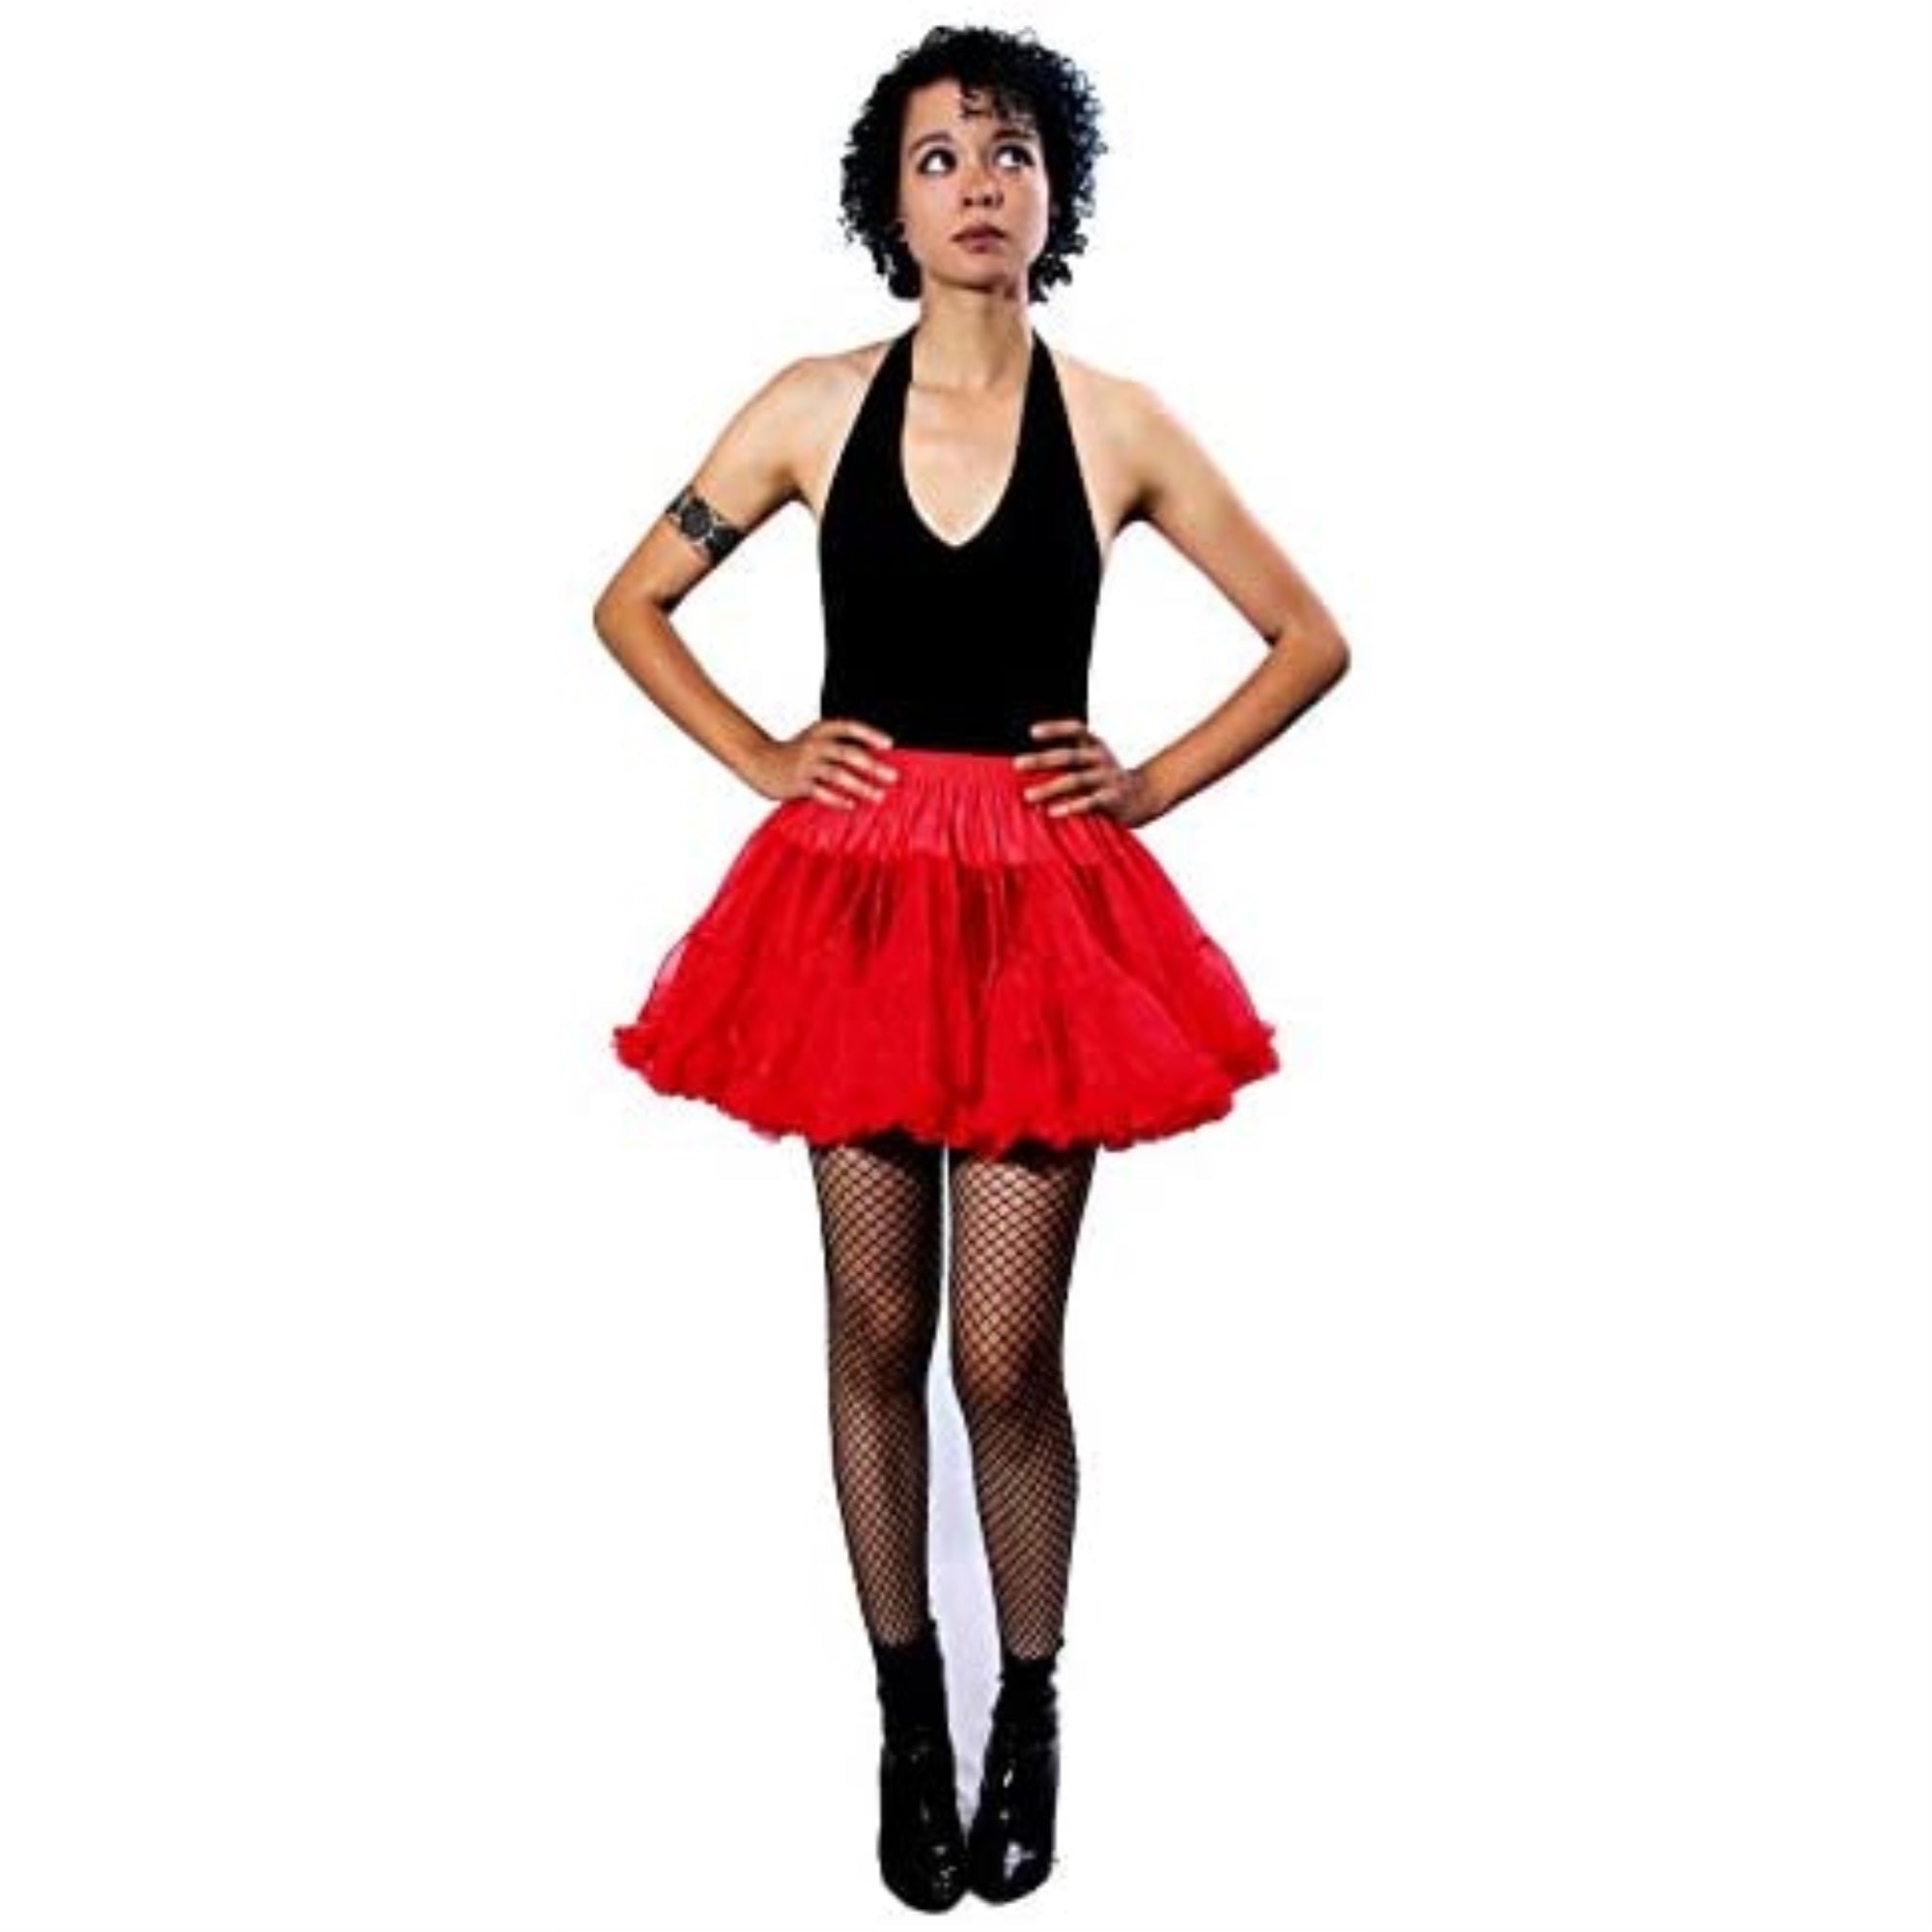 Women's 15in Sexy Tutu Skirt for Halloween & Costume Wear-Red